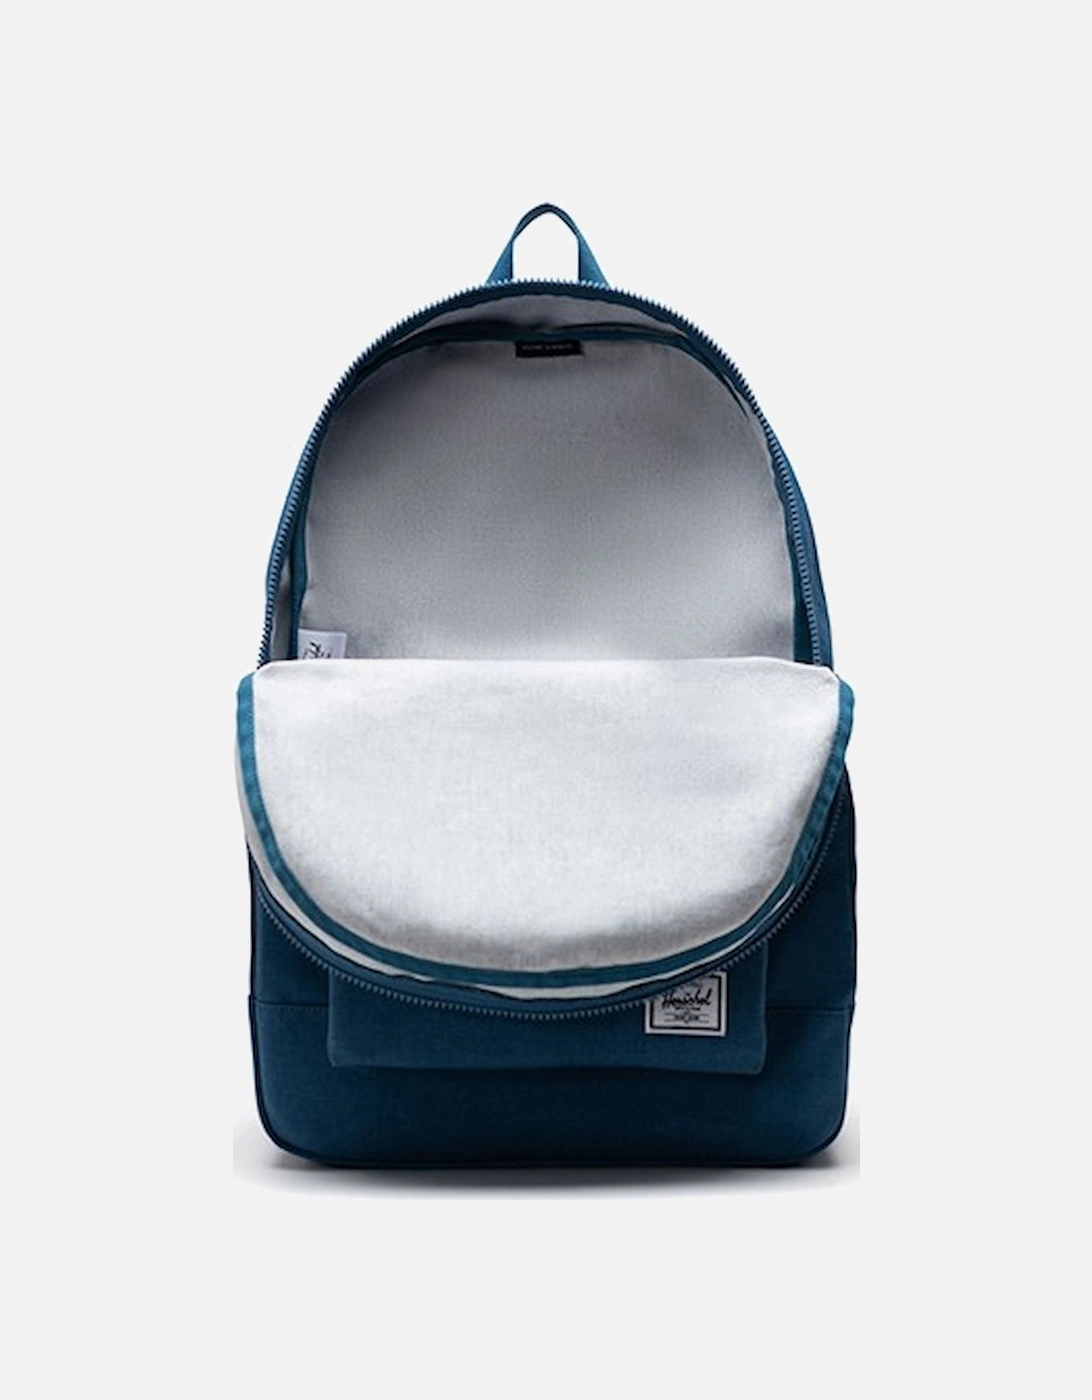 PA Canvas Casual Daypack Blue Ashes